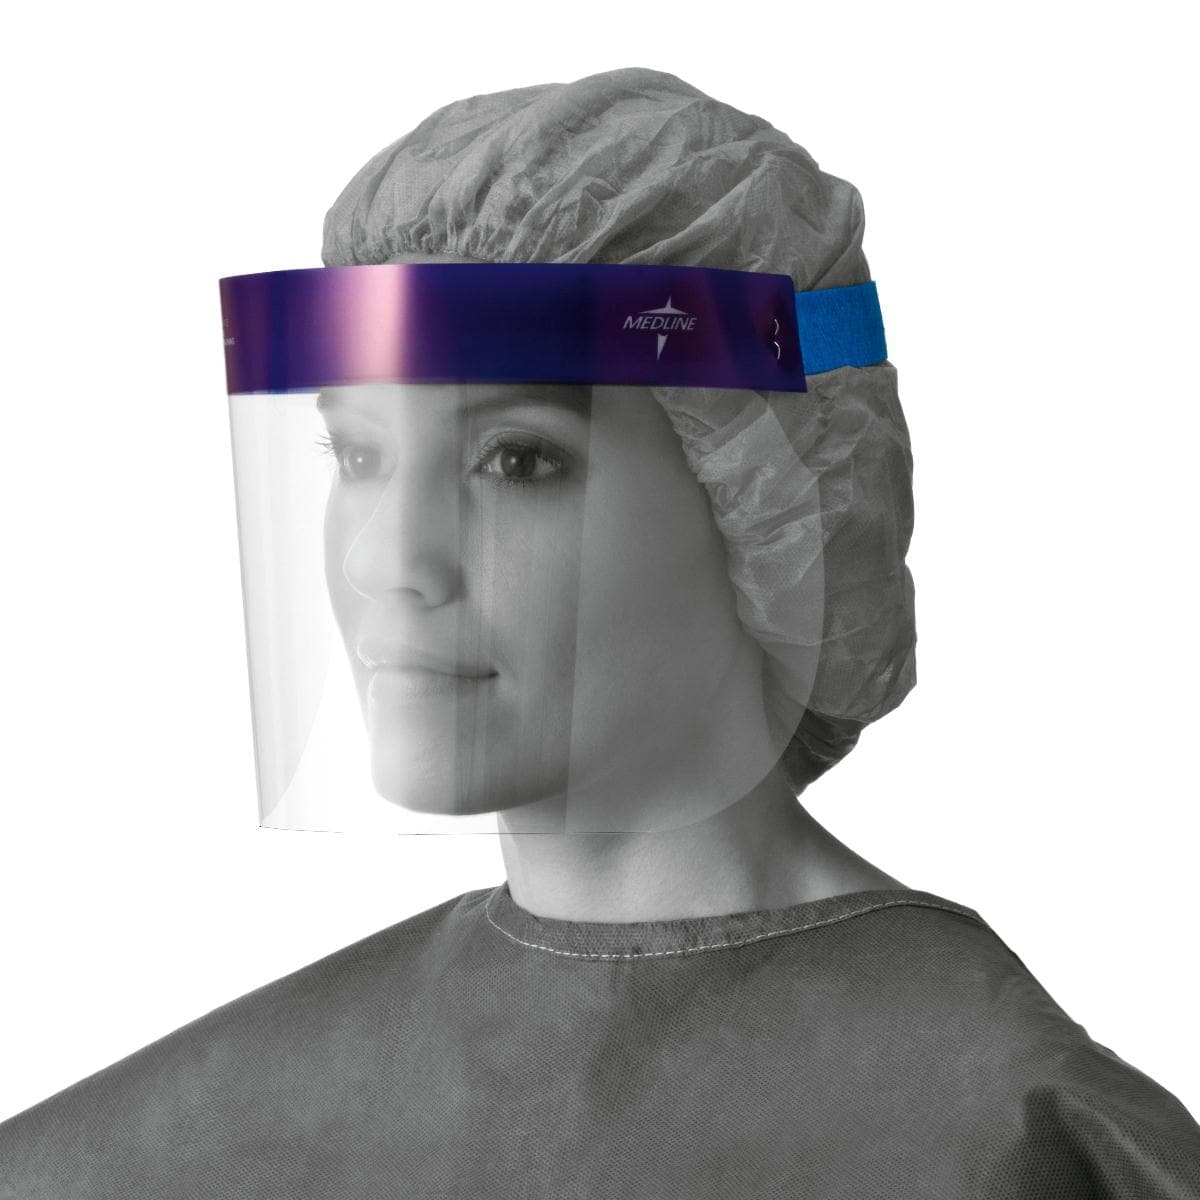 Medline Case of 96 Medline 3/4 Length Disposable Face Shields with Foam Top and Elastic Band